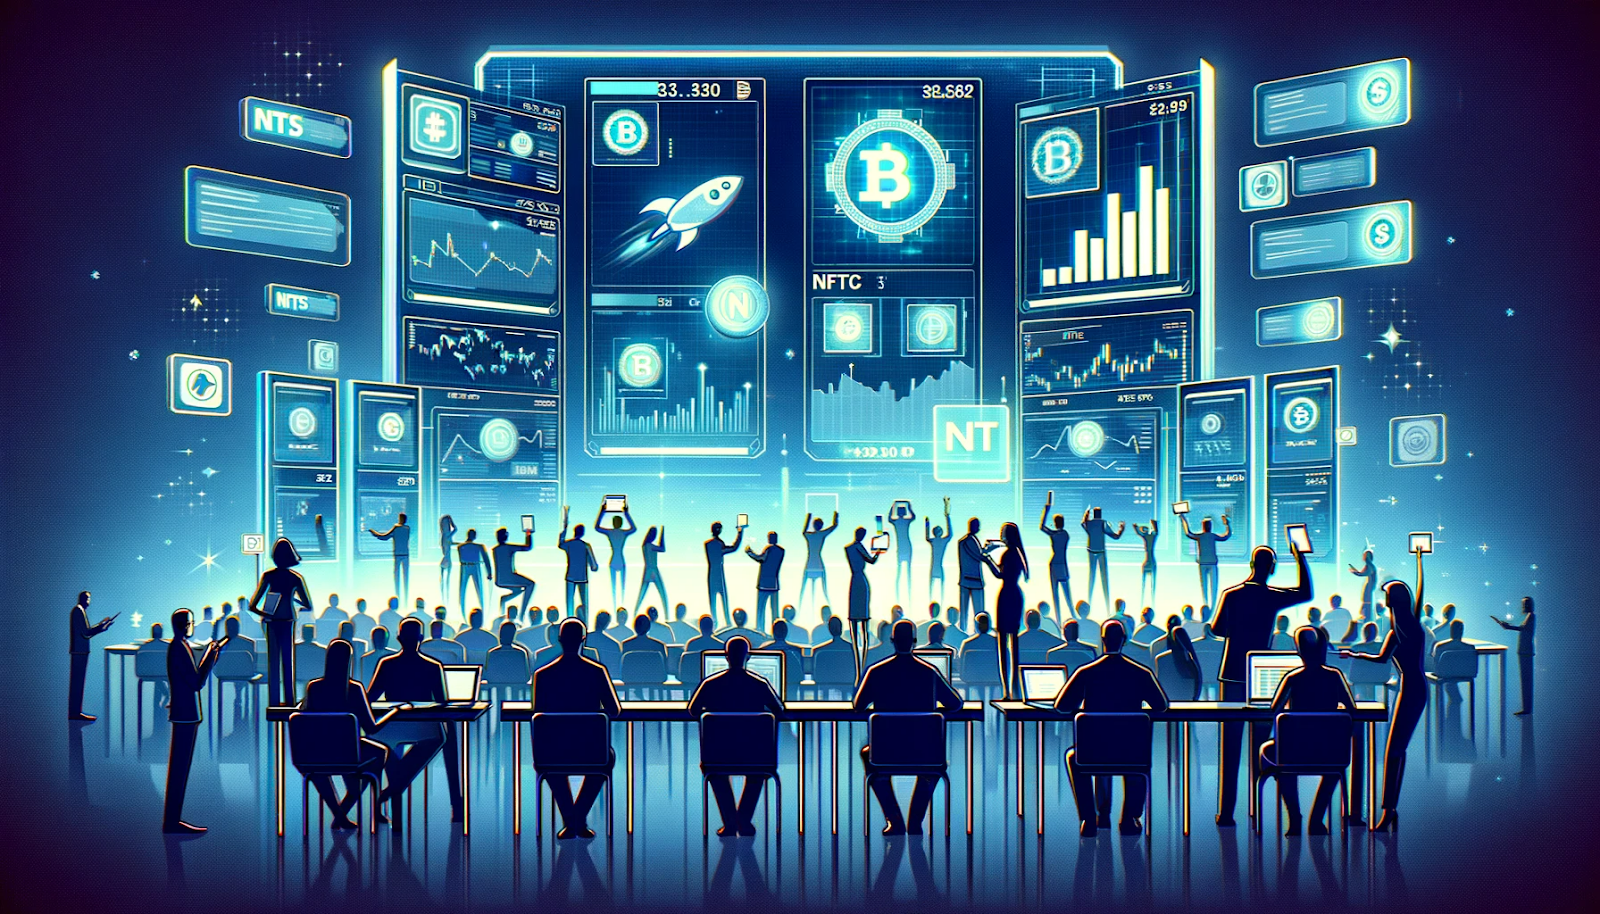 Futuristic depiction of a digital NFT auction with a diverse audience engaged in bidding on various digital items, conveying excitement and the competitive nature of the NFT market.